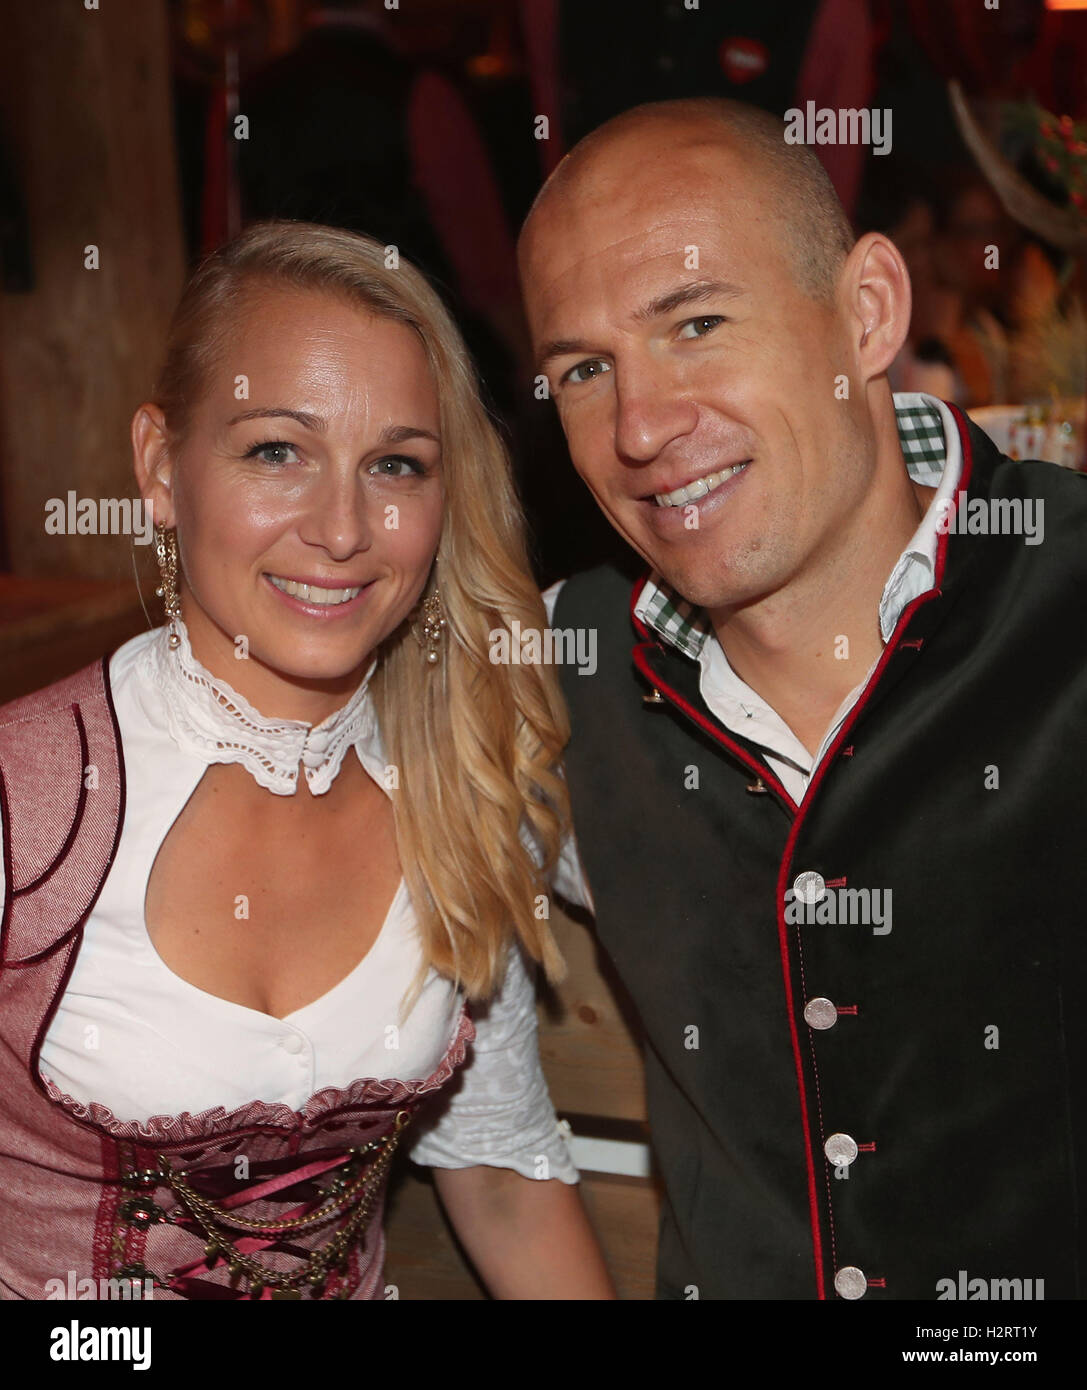 Munich, Germany. 2nd Oct, 2016. HANDOUT - A handout picture made available on 02 October 2016 by Getty Images shows Arjen Robben of FC Bayern Muenchen and his wife Bernadien Eillert attending the Oktoberfest beer festival at Kaefer Wiesenschaenke tent at Theresienwiese on October 2, 2016 in Munich, Germany. Photo: Alexander Hassenstein/Bongarts/Getty Images/dpa (ATTENTION EDITORS - Editorial use only in connection with current reporting and mandatory source credit: Alexander Hassenstein/Bongarts/Getty Images/dpa)/dpa/Alamy Live News Stock Photo